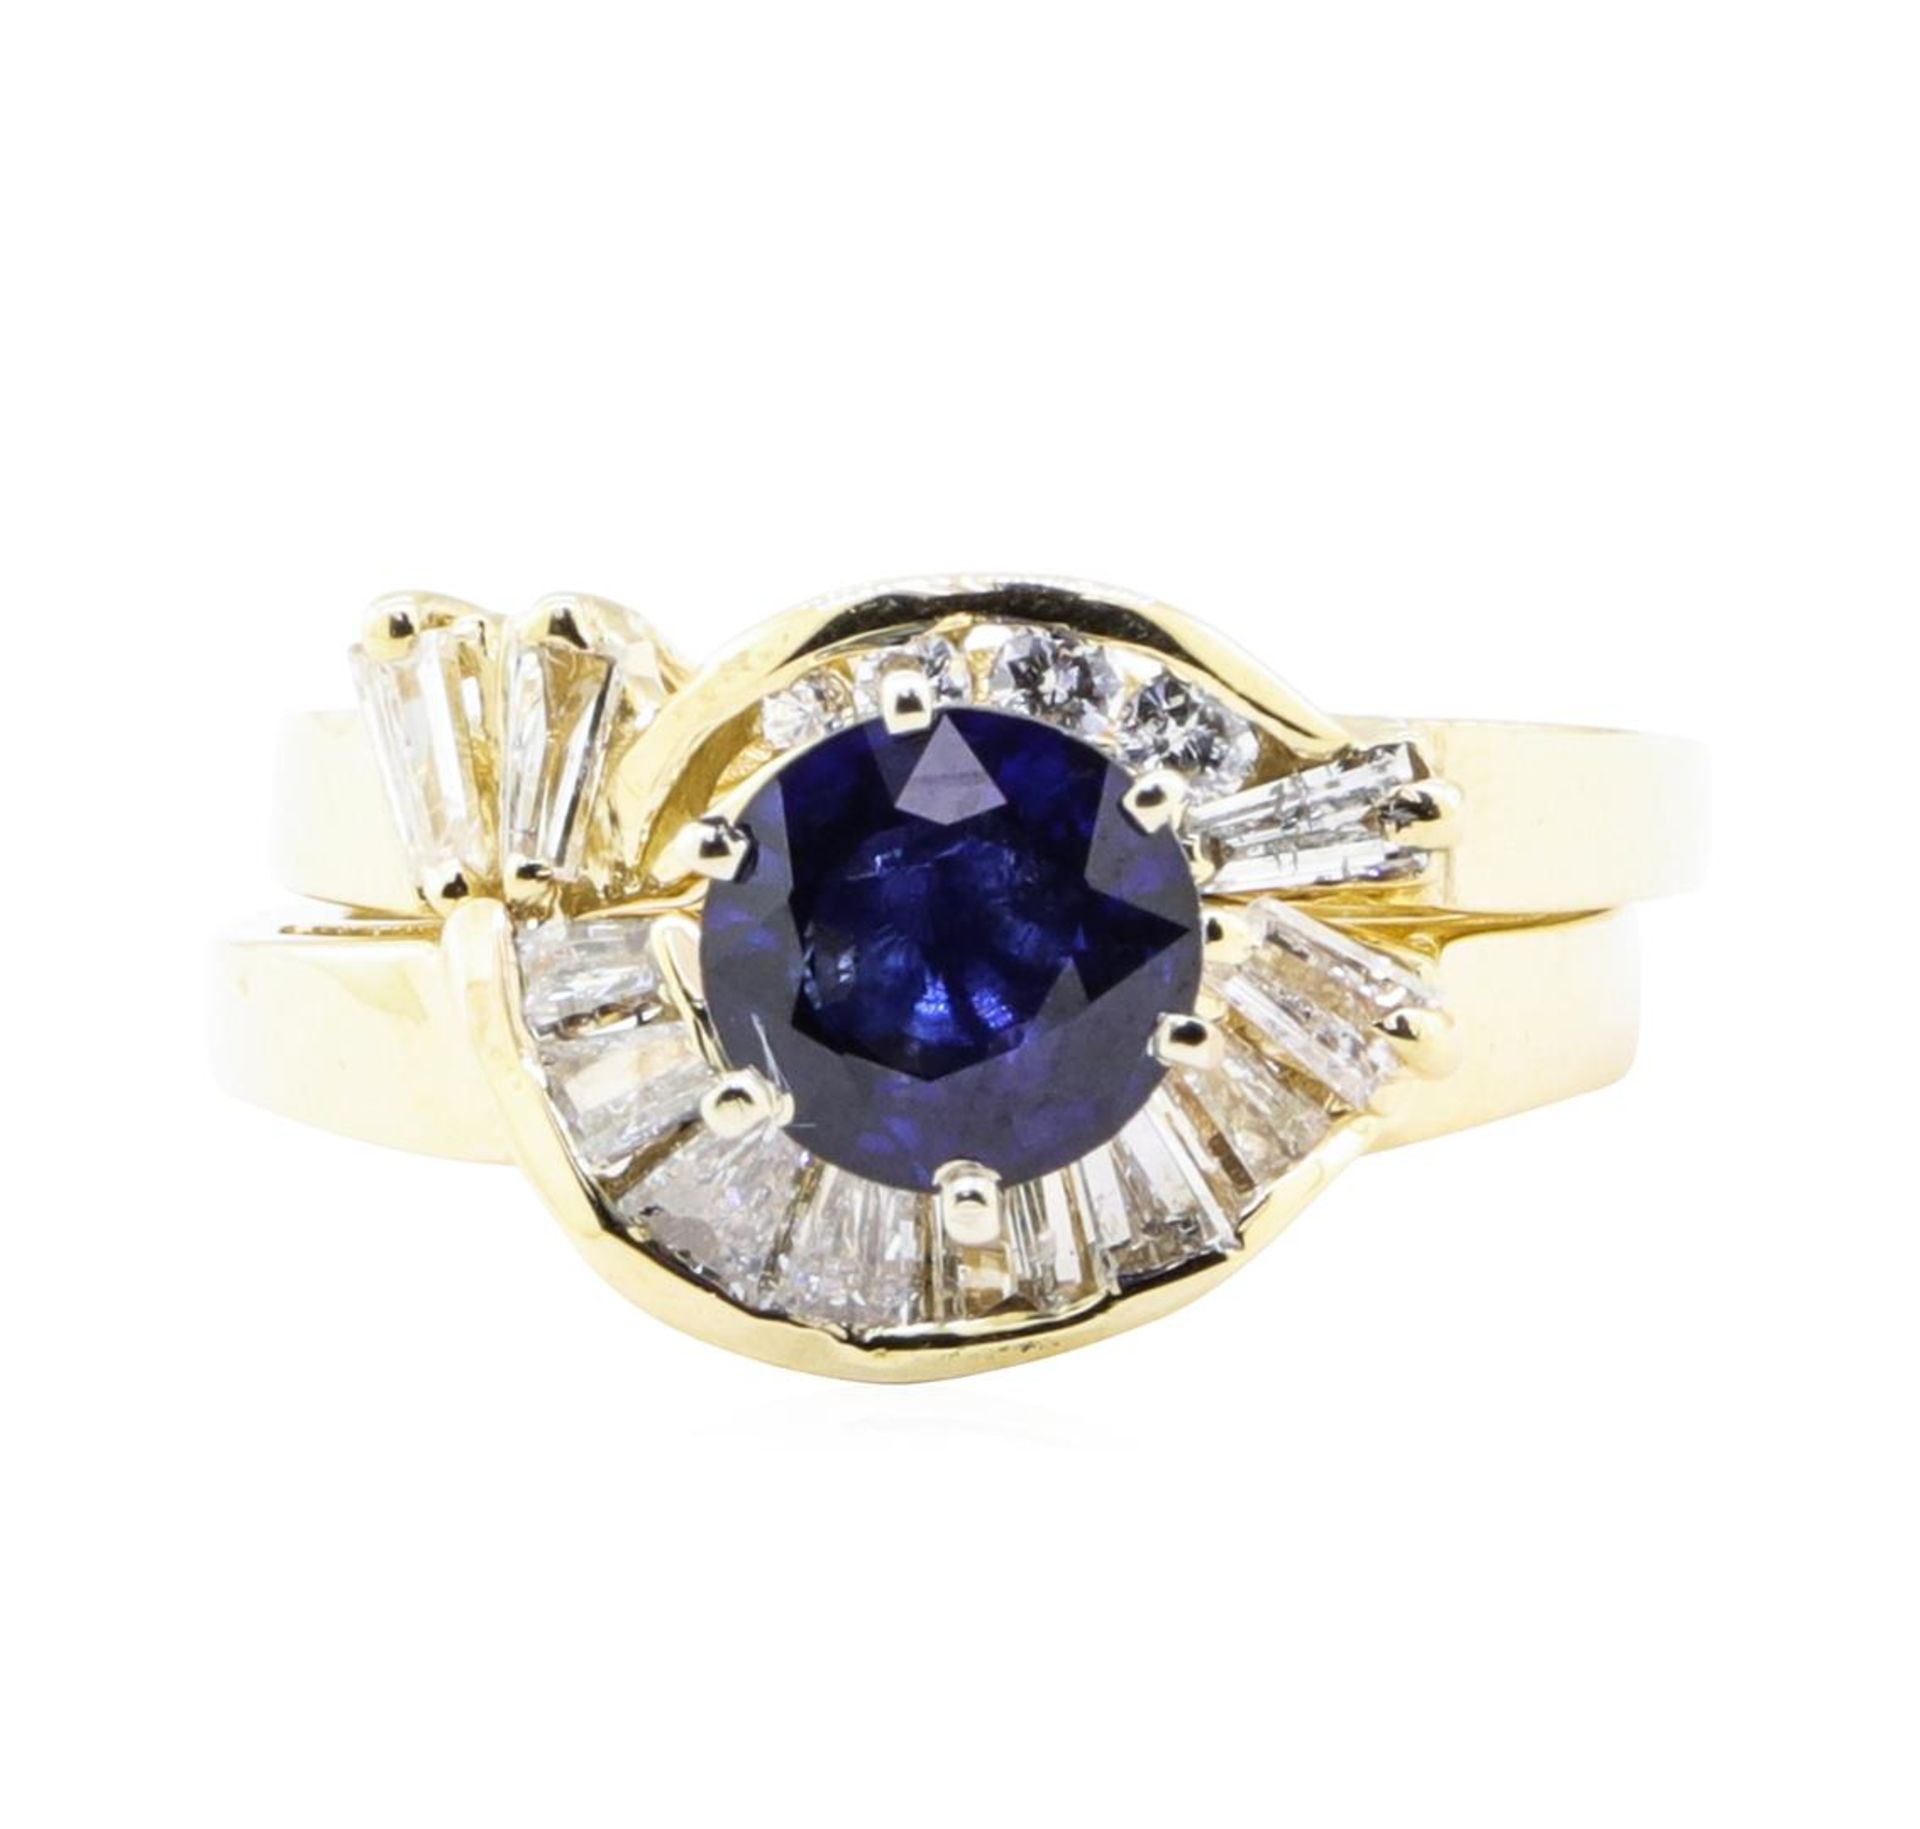 1.83 ctw Sapphire And Diamond Ring And Band - 14KT Yellow Gold - Image 2 of 4